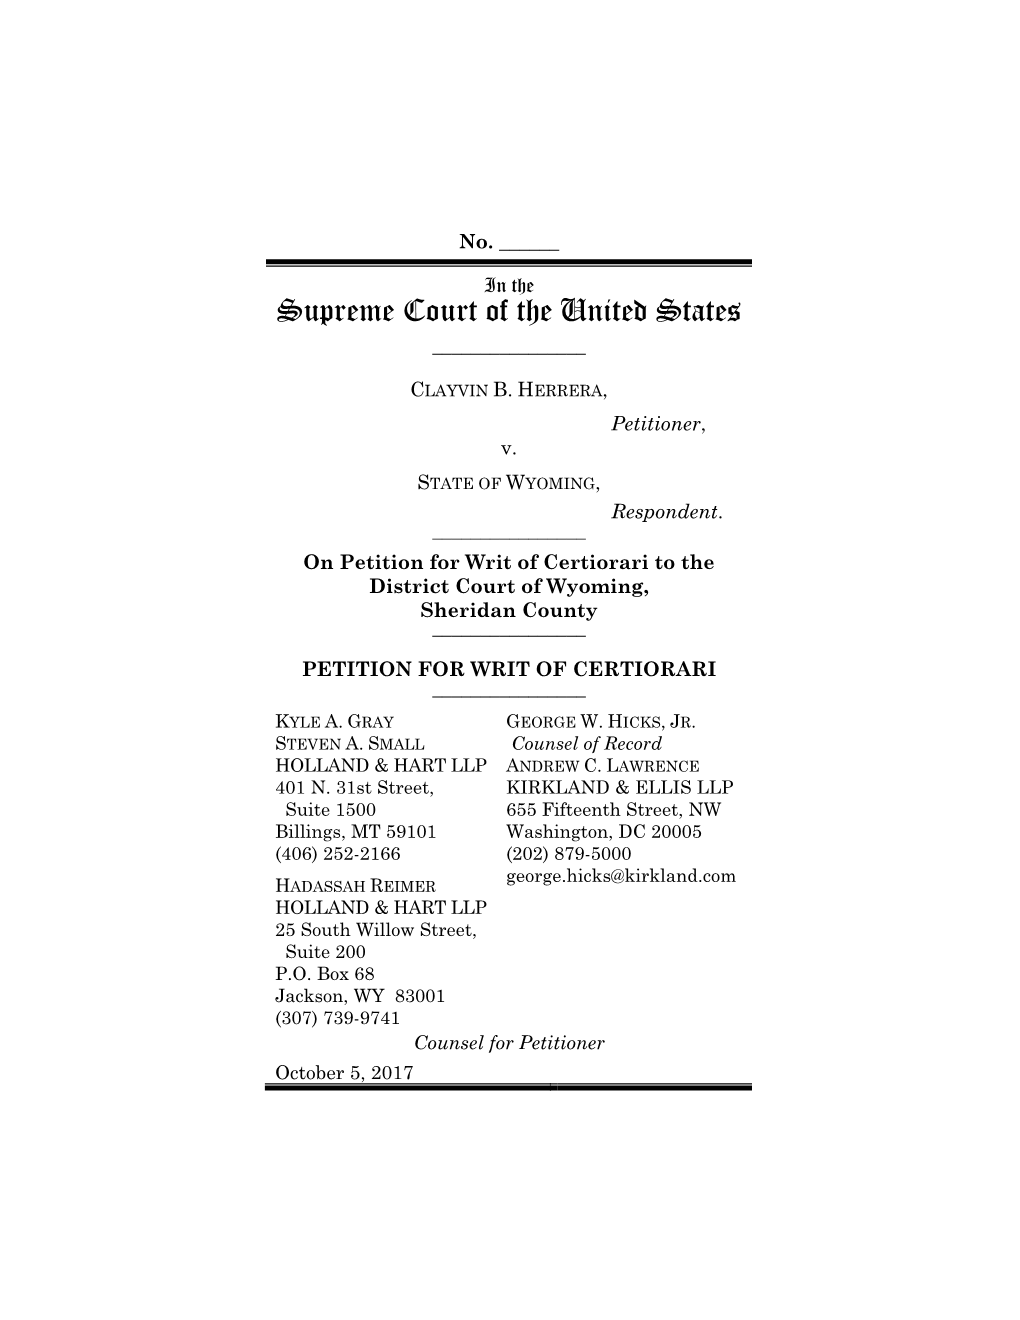 Petition for Certiorari in Mille Lacs, the State of Minnesota Prominently Cited Repsis As Conflicting with the Eighth Circuit Decision This Court Ultimately Affirmed